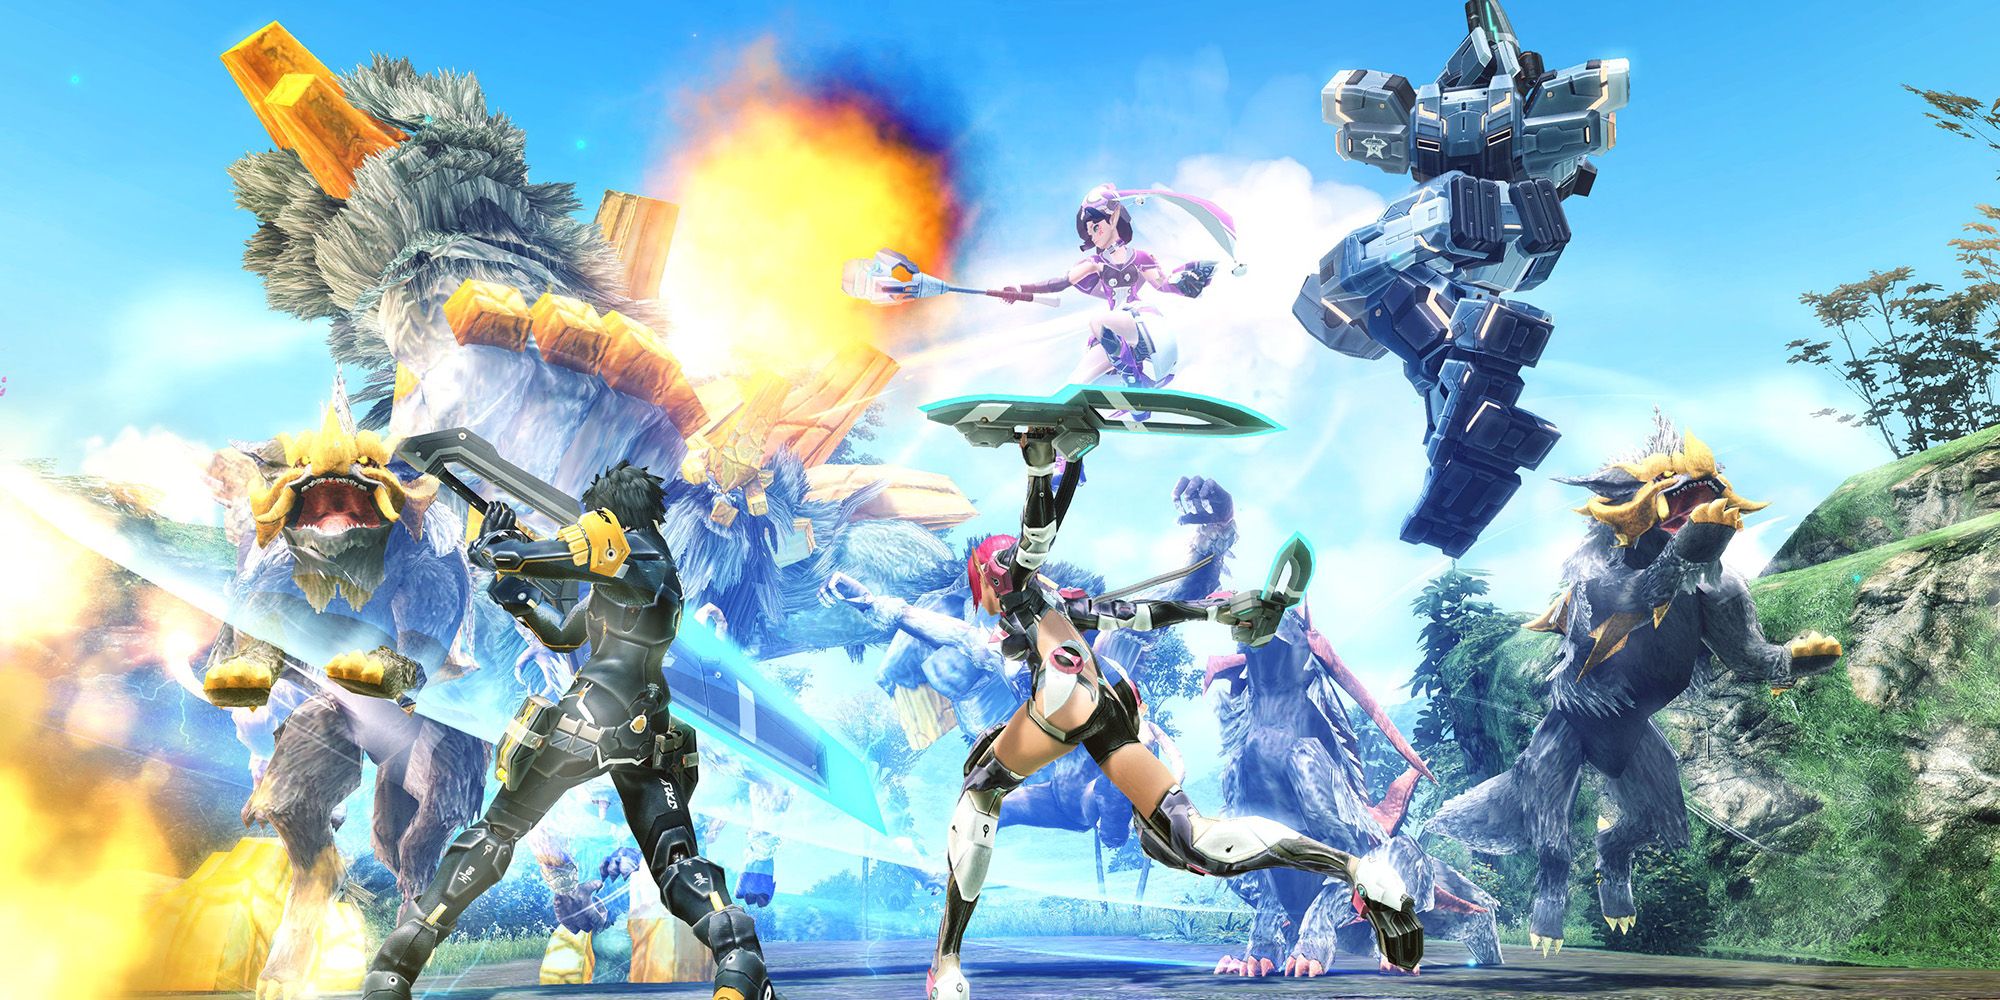 Multiple characters battling during Phantasy Star Online 2 RockBear Party